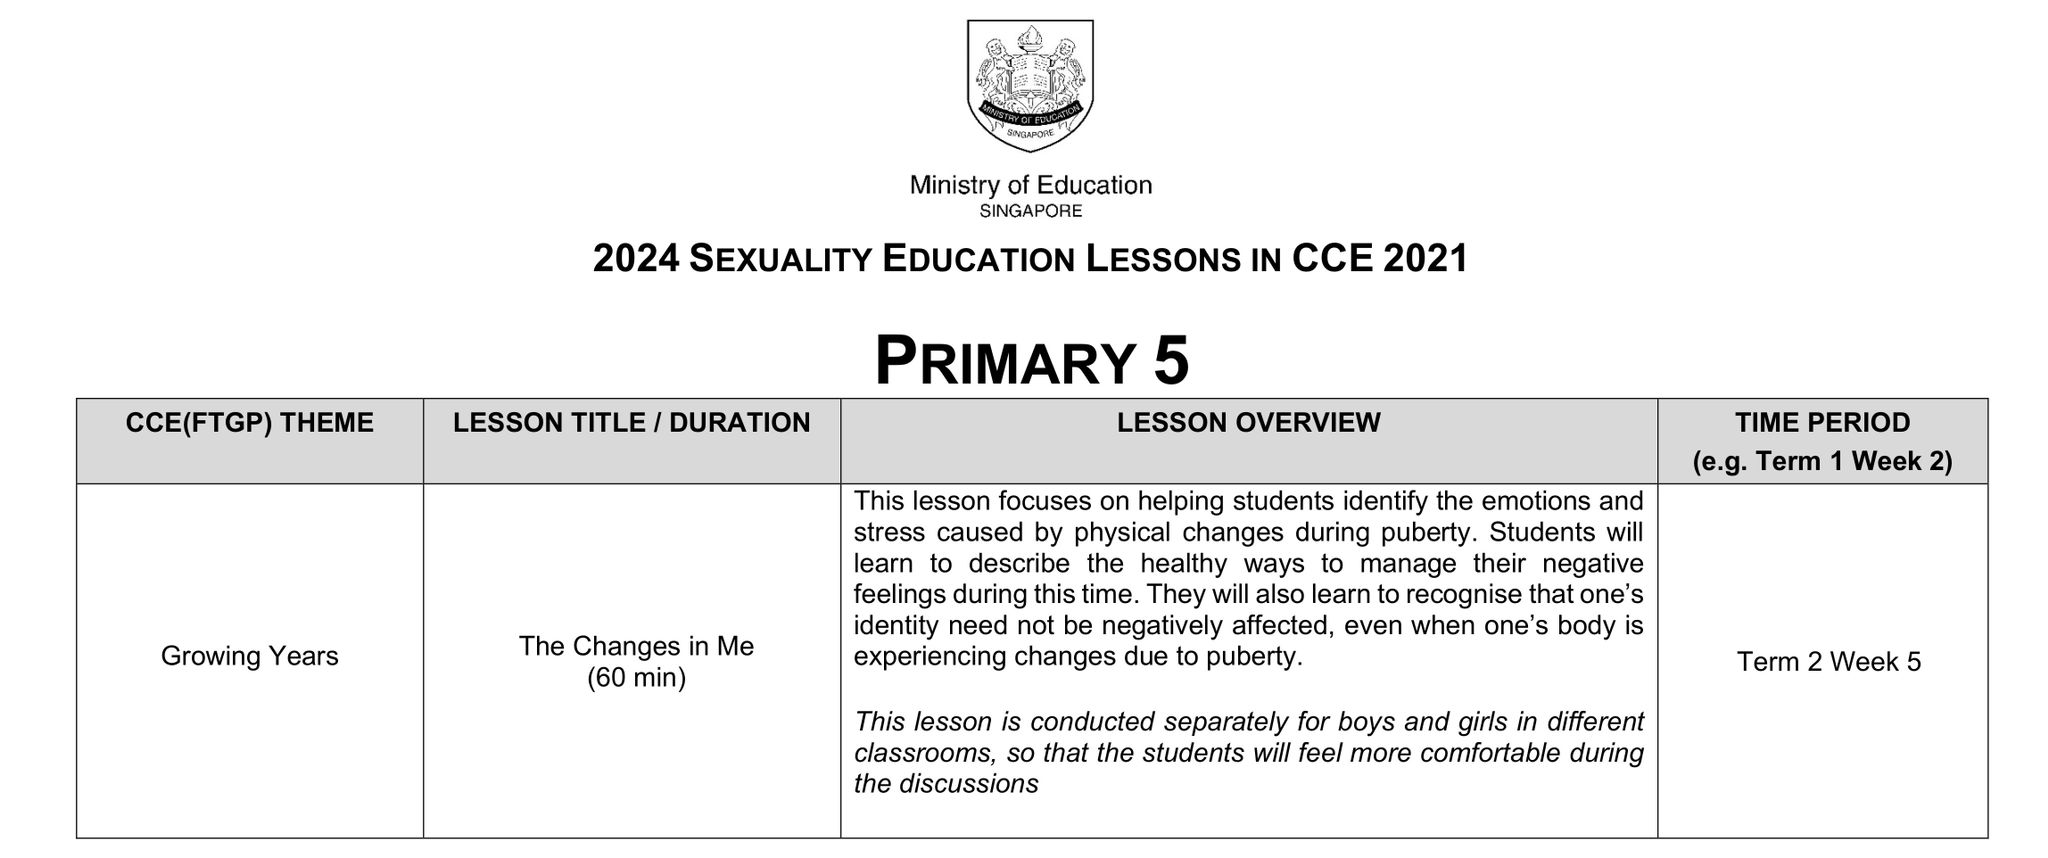 Primary 5 CCE Lessons 2024